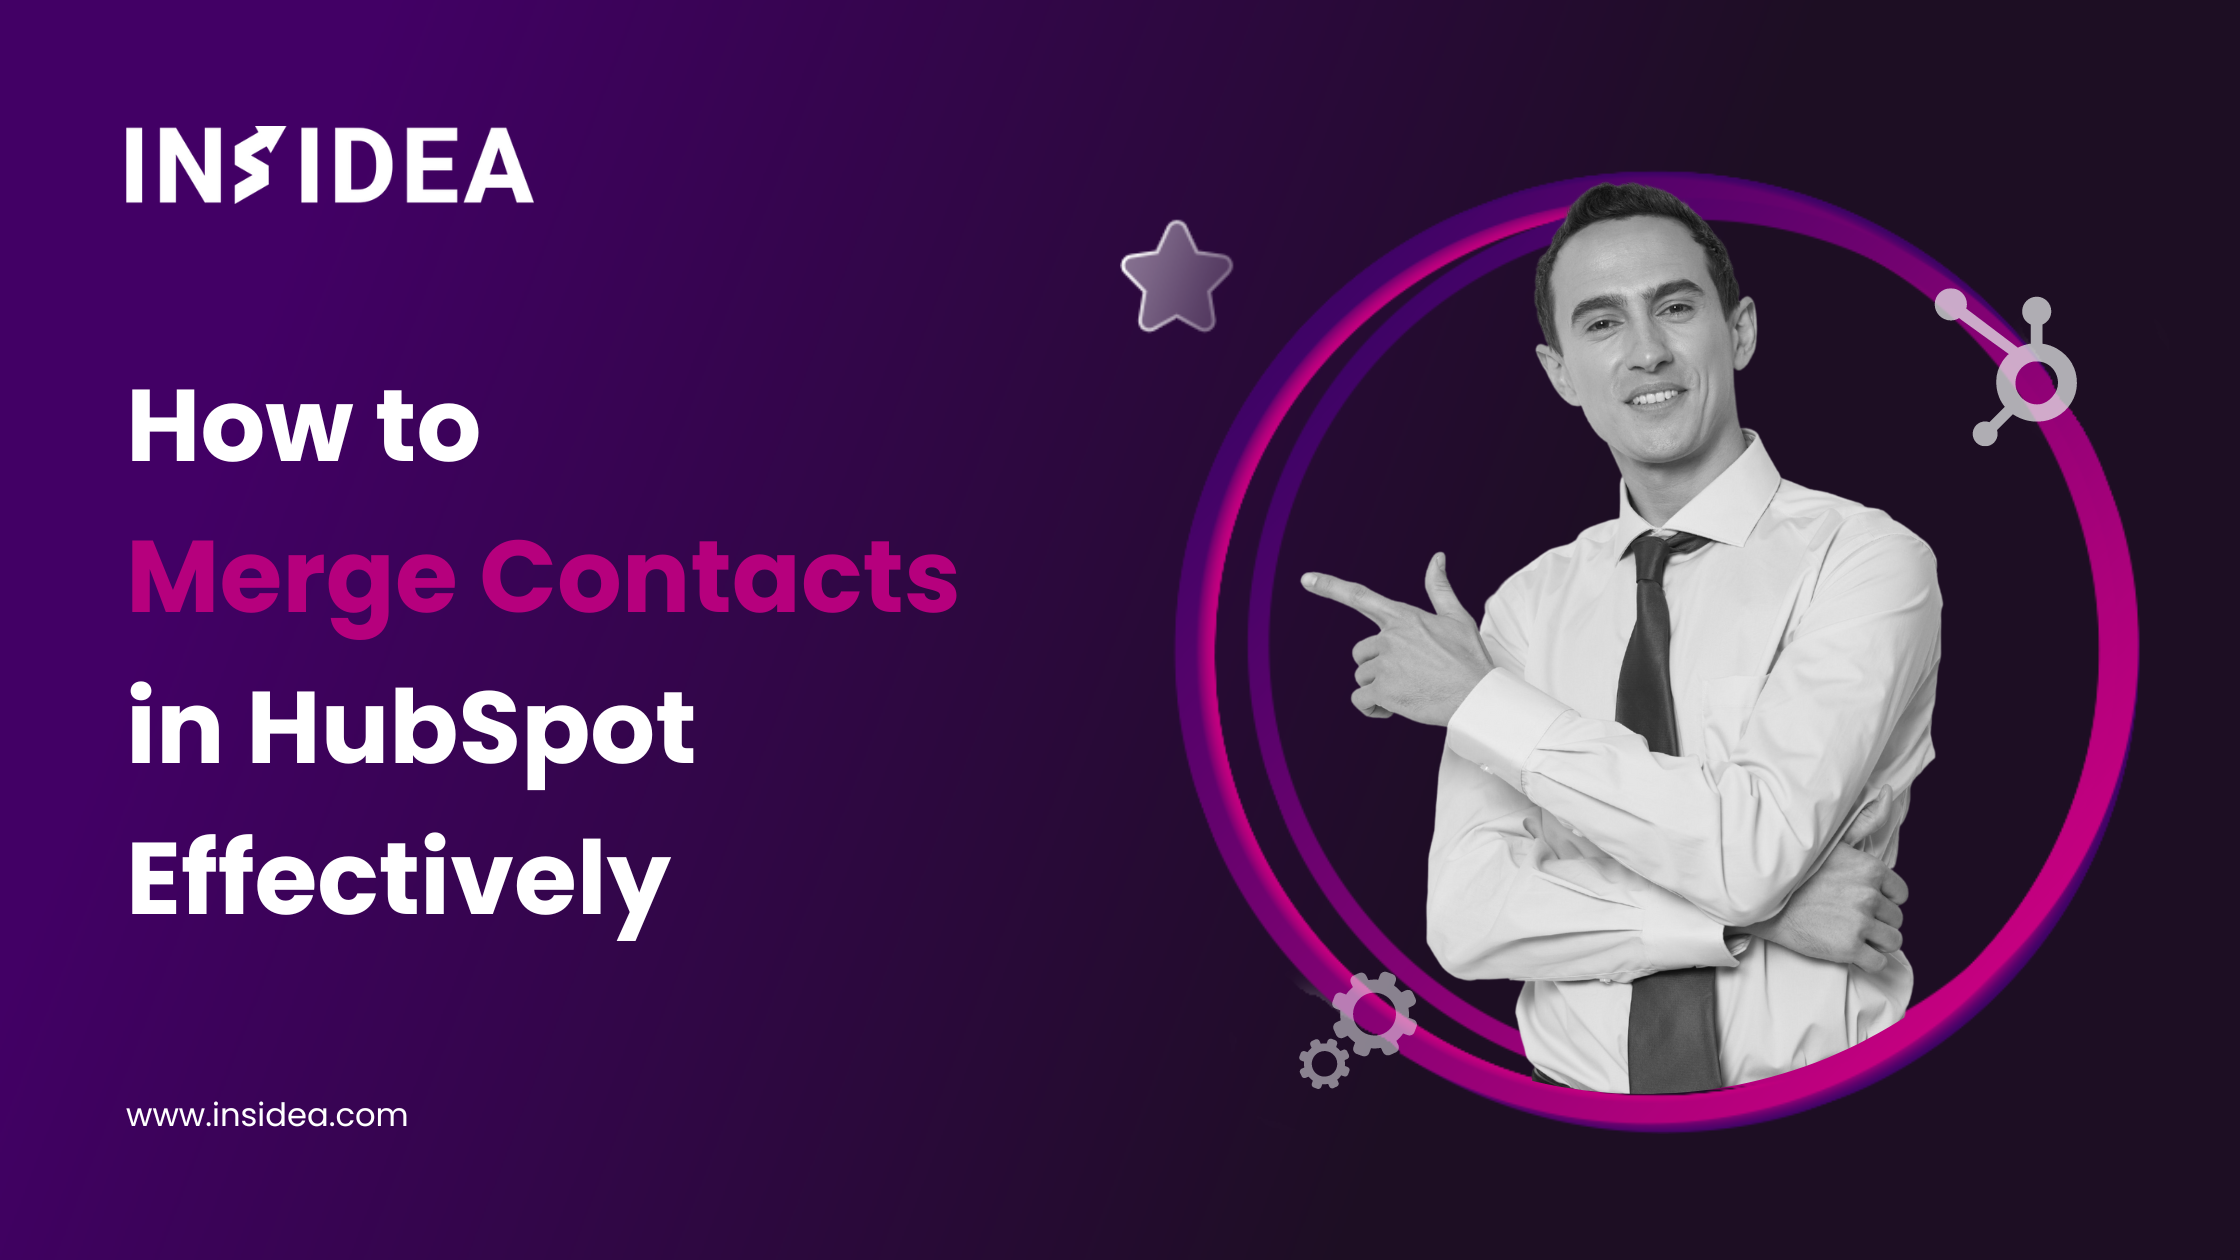 How to Merge Contacts in HubSpot Effectively